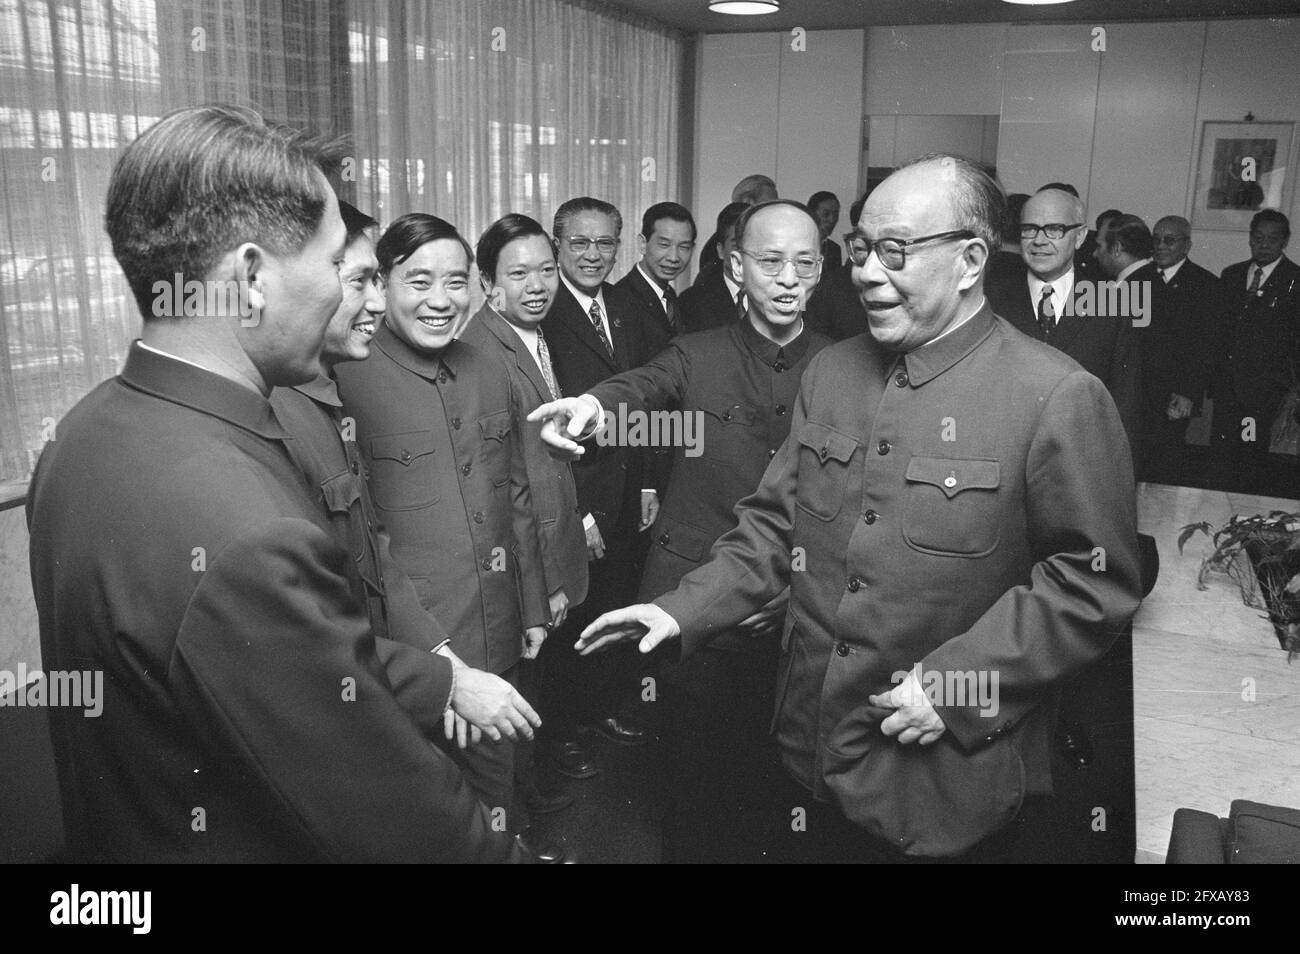 First Ambassador of People's Republic of China to the Netherlands arrives at Schiphol Airport, Ambassador Hao Te Ching and ande Chinese make acquaintance, November 2, 1972, ambassadors, The Netherlands, 20th century press agency photo, news to remember, documentary, historic photography 1945-1990, visual stories, human history of the Twentieth Century, capturing moments in time Stock Photo